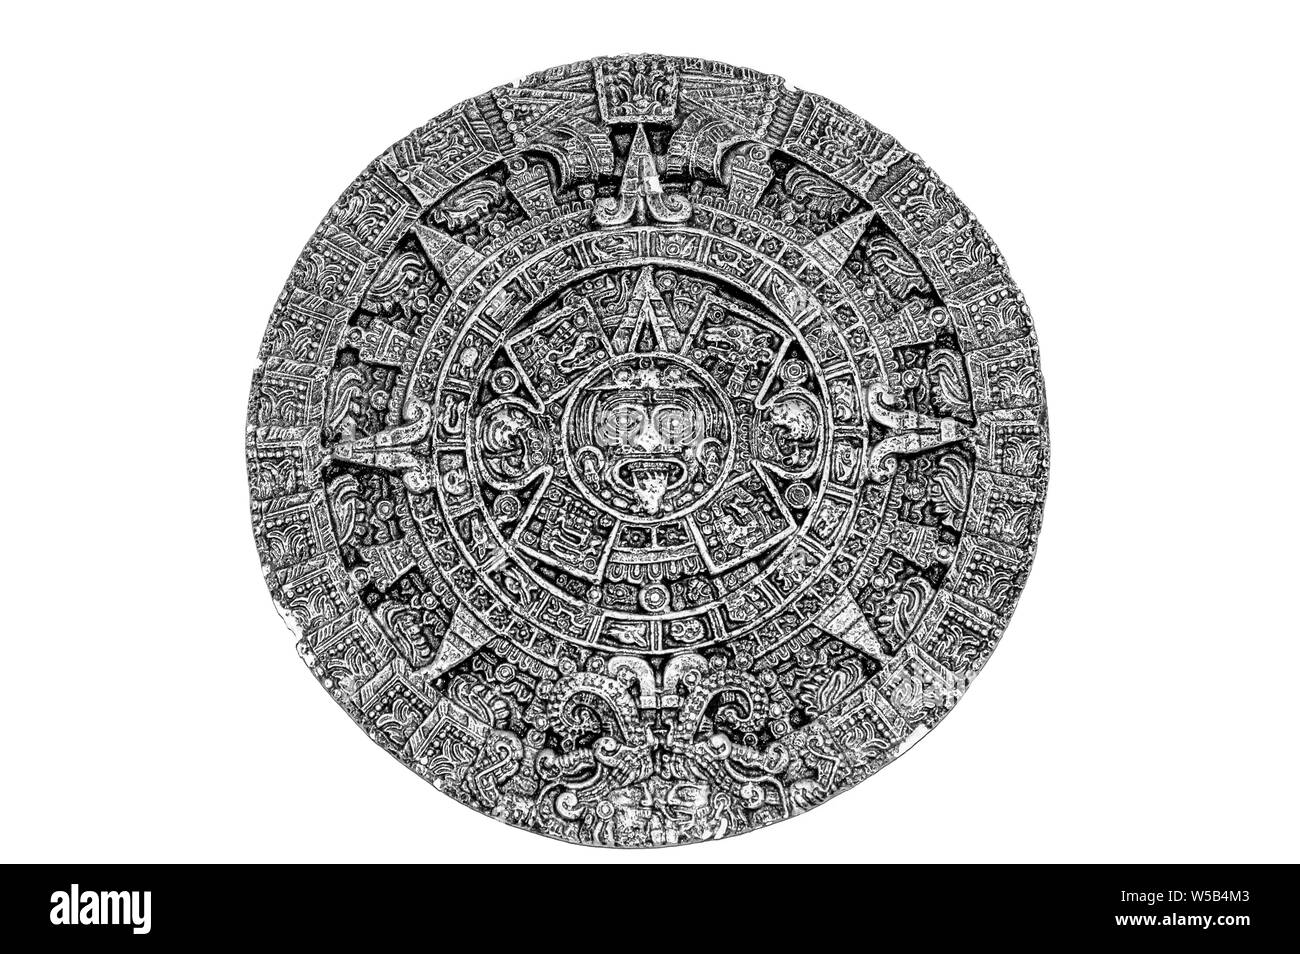 An ancient Aztec calendar which was once used by native North American people. Monochrome. Stock Photo